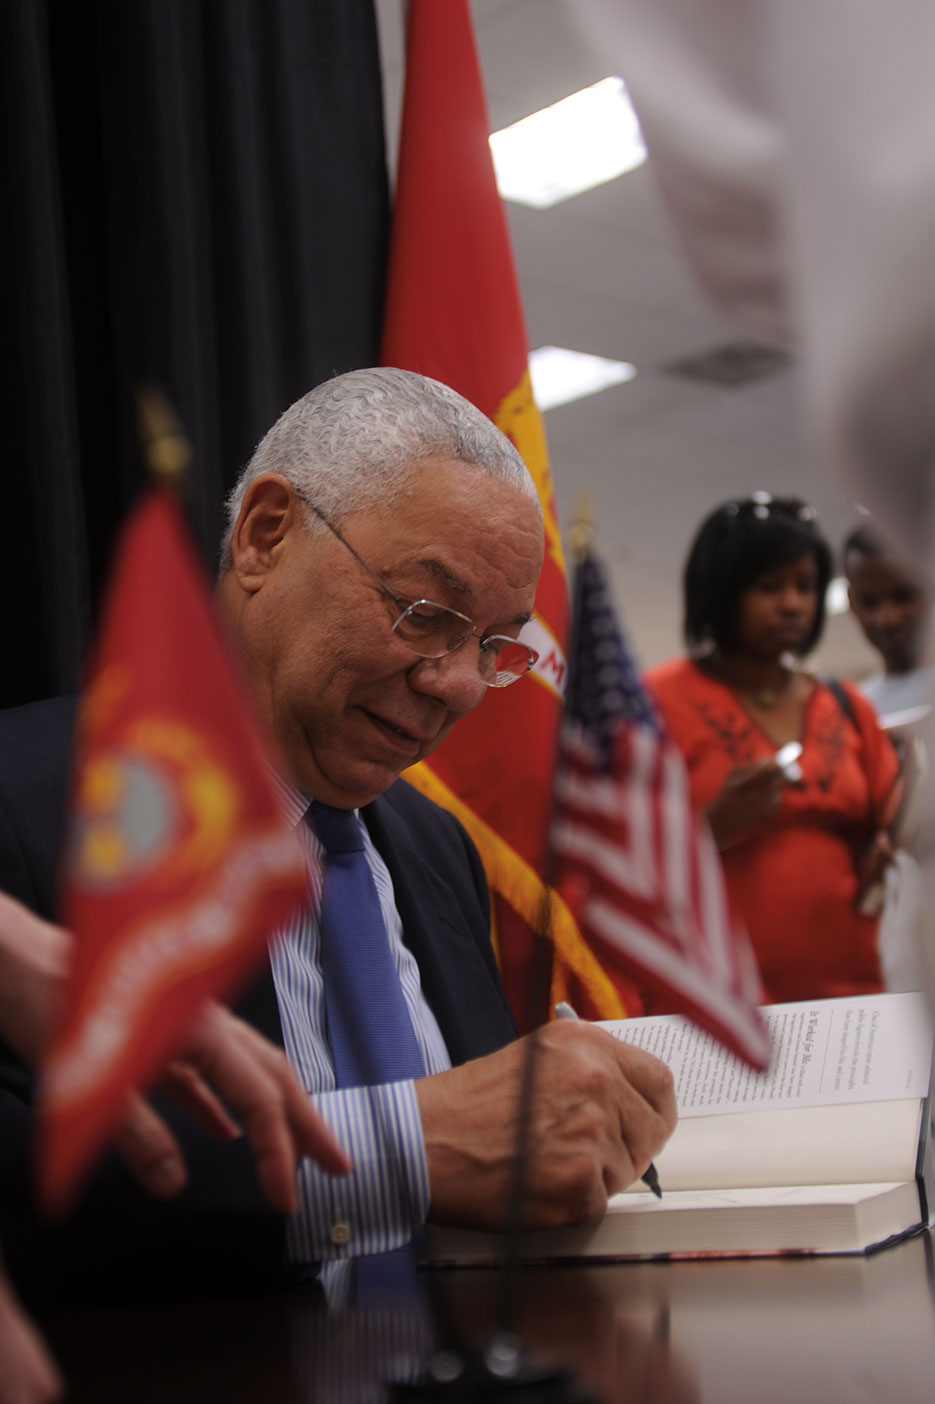 Retired Army General Colin Powell signs books at Marine Corps Exchange aboard Marine Corps Base Quantico in June 2013 (U.S. Marine Corps/Sam Ellis)